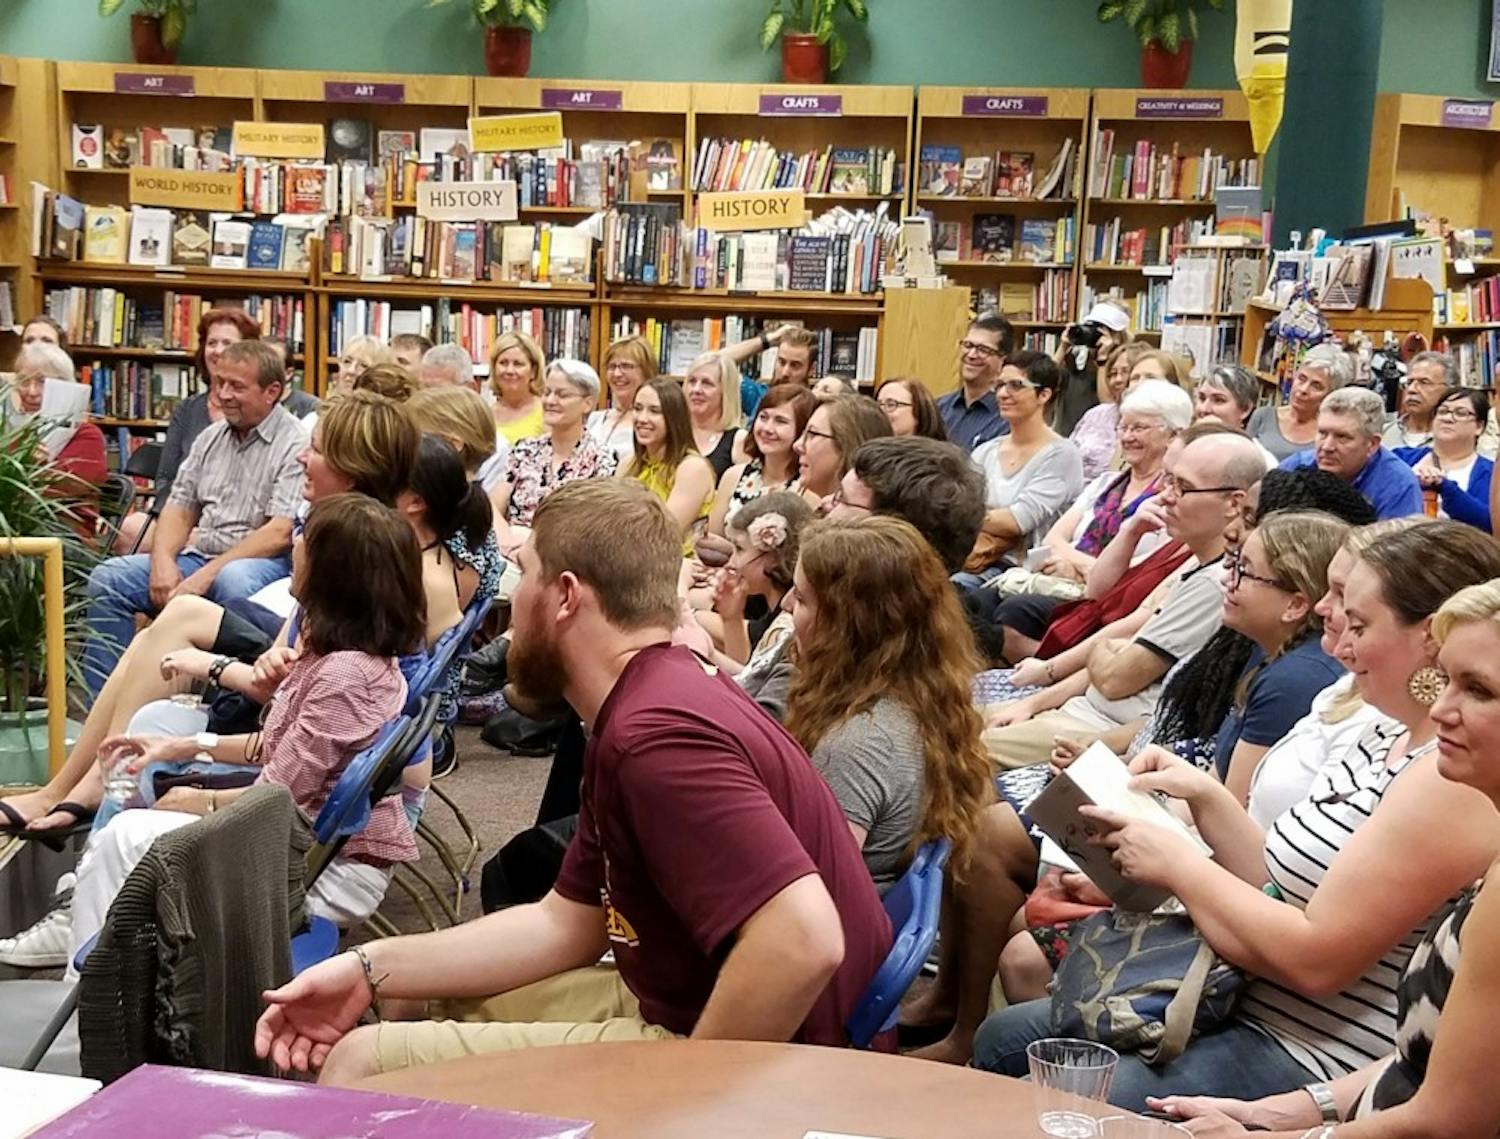 Audience members listening to a poetry reading at Changing Hands Bookstore on Sept. 1, 2016. Rosemarie Dombrowski will be reading her poetry at Changing Hands Bookstore on Dec. 2, 2016.